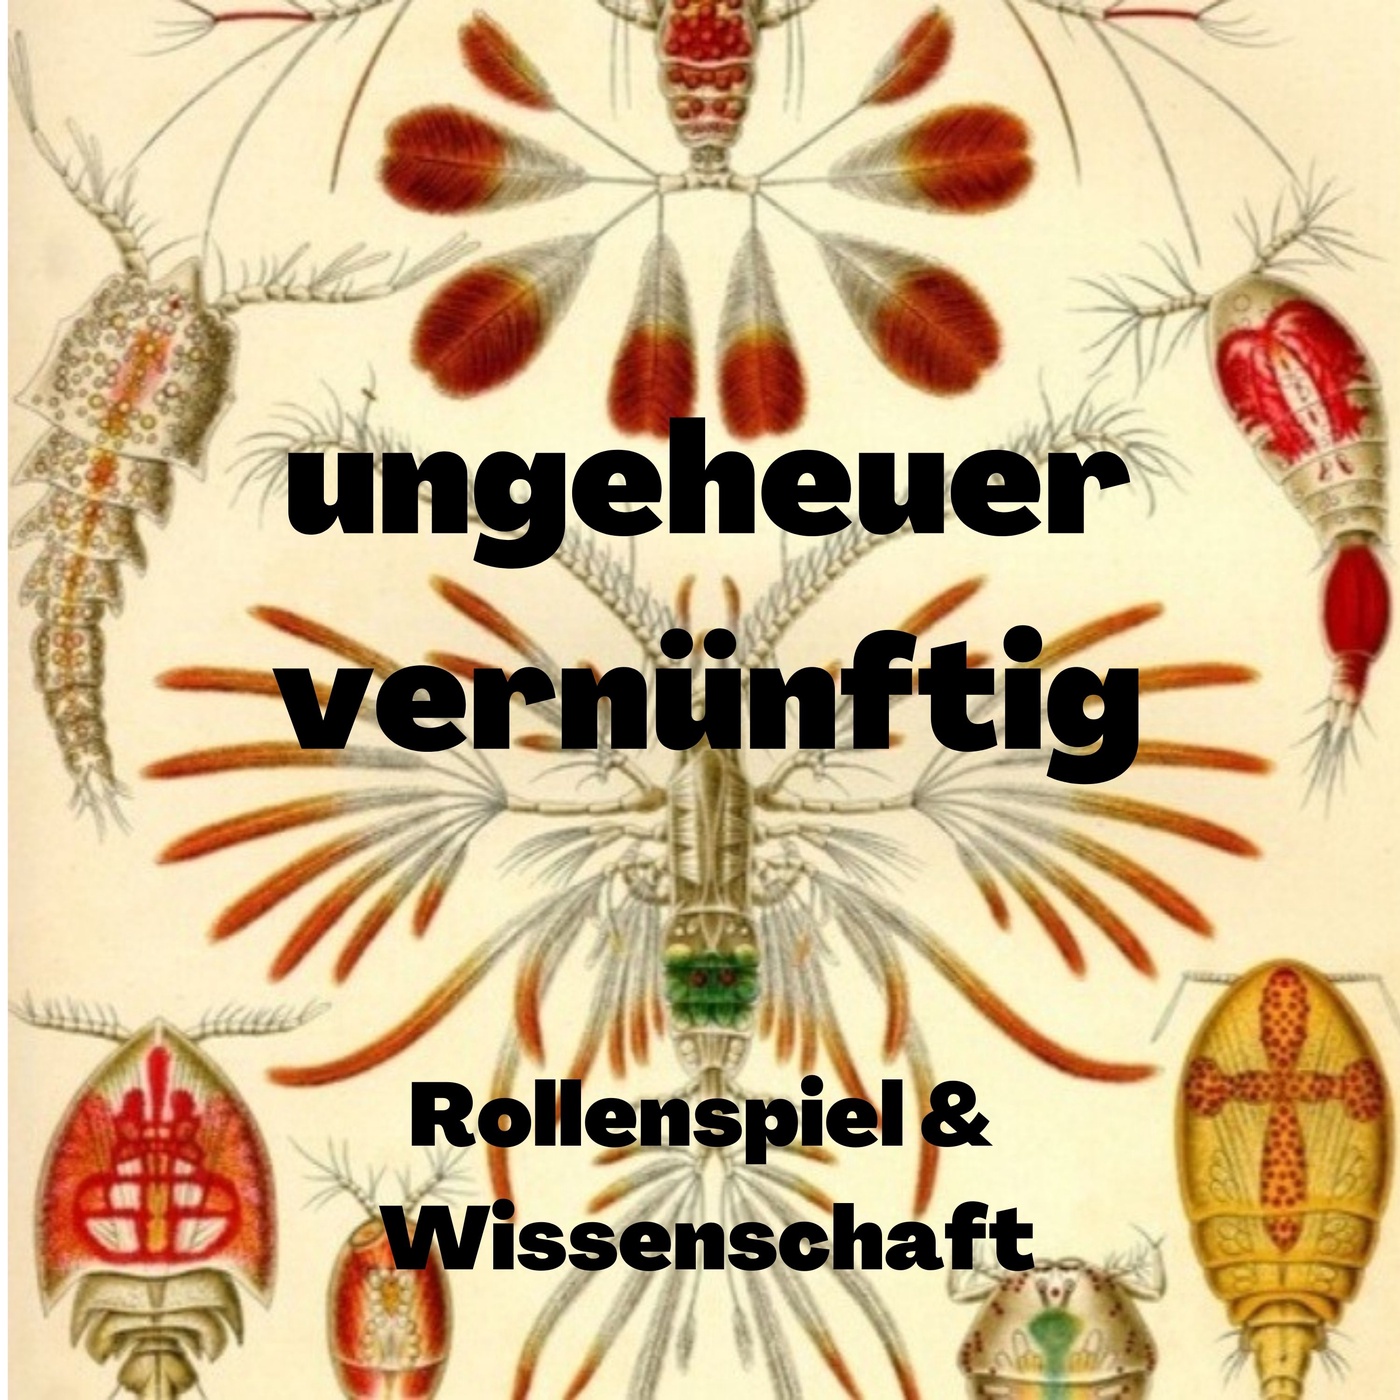 Folge 1: Unsere Lieblings-Ungeheuer